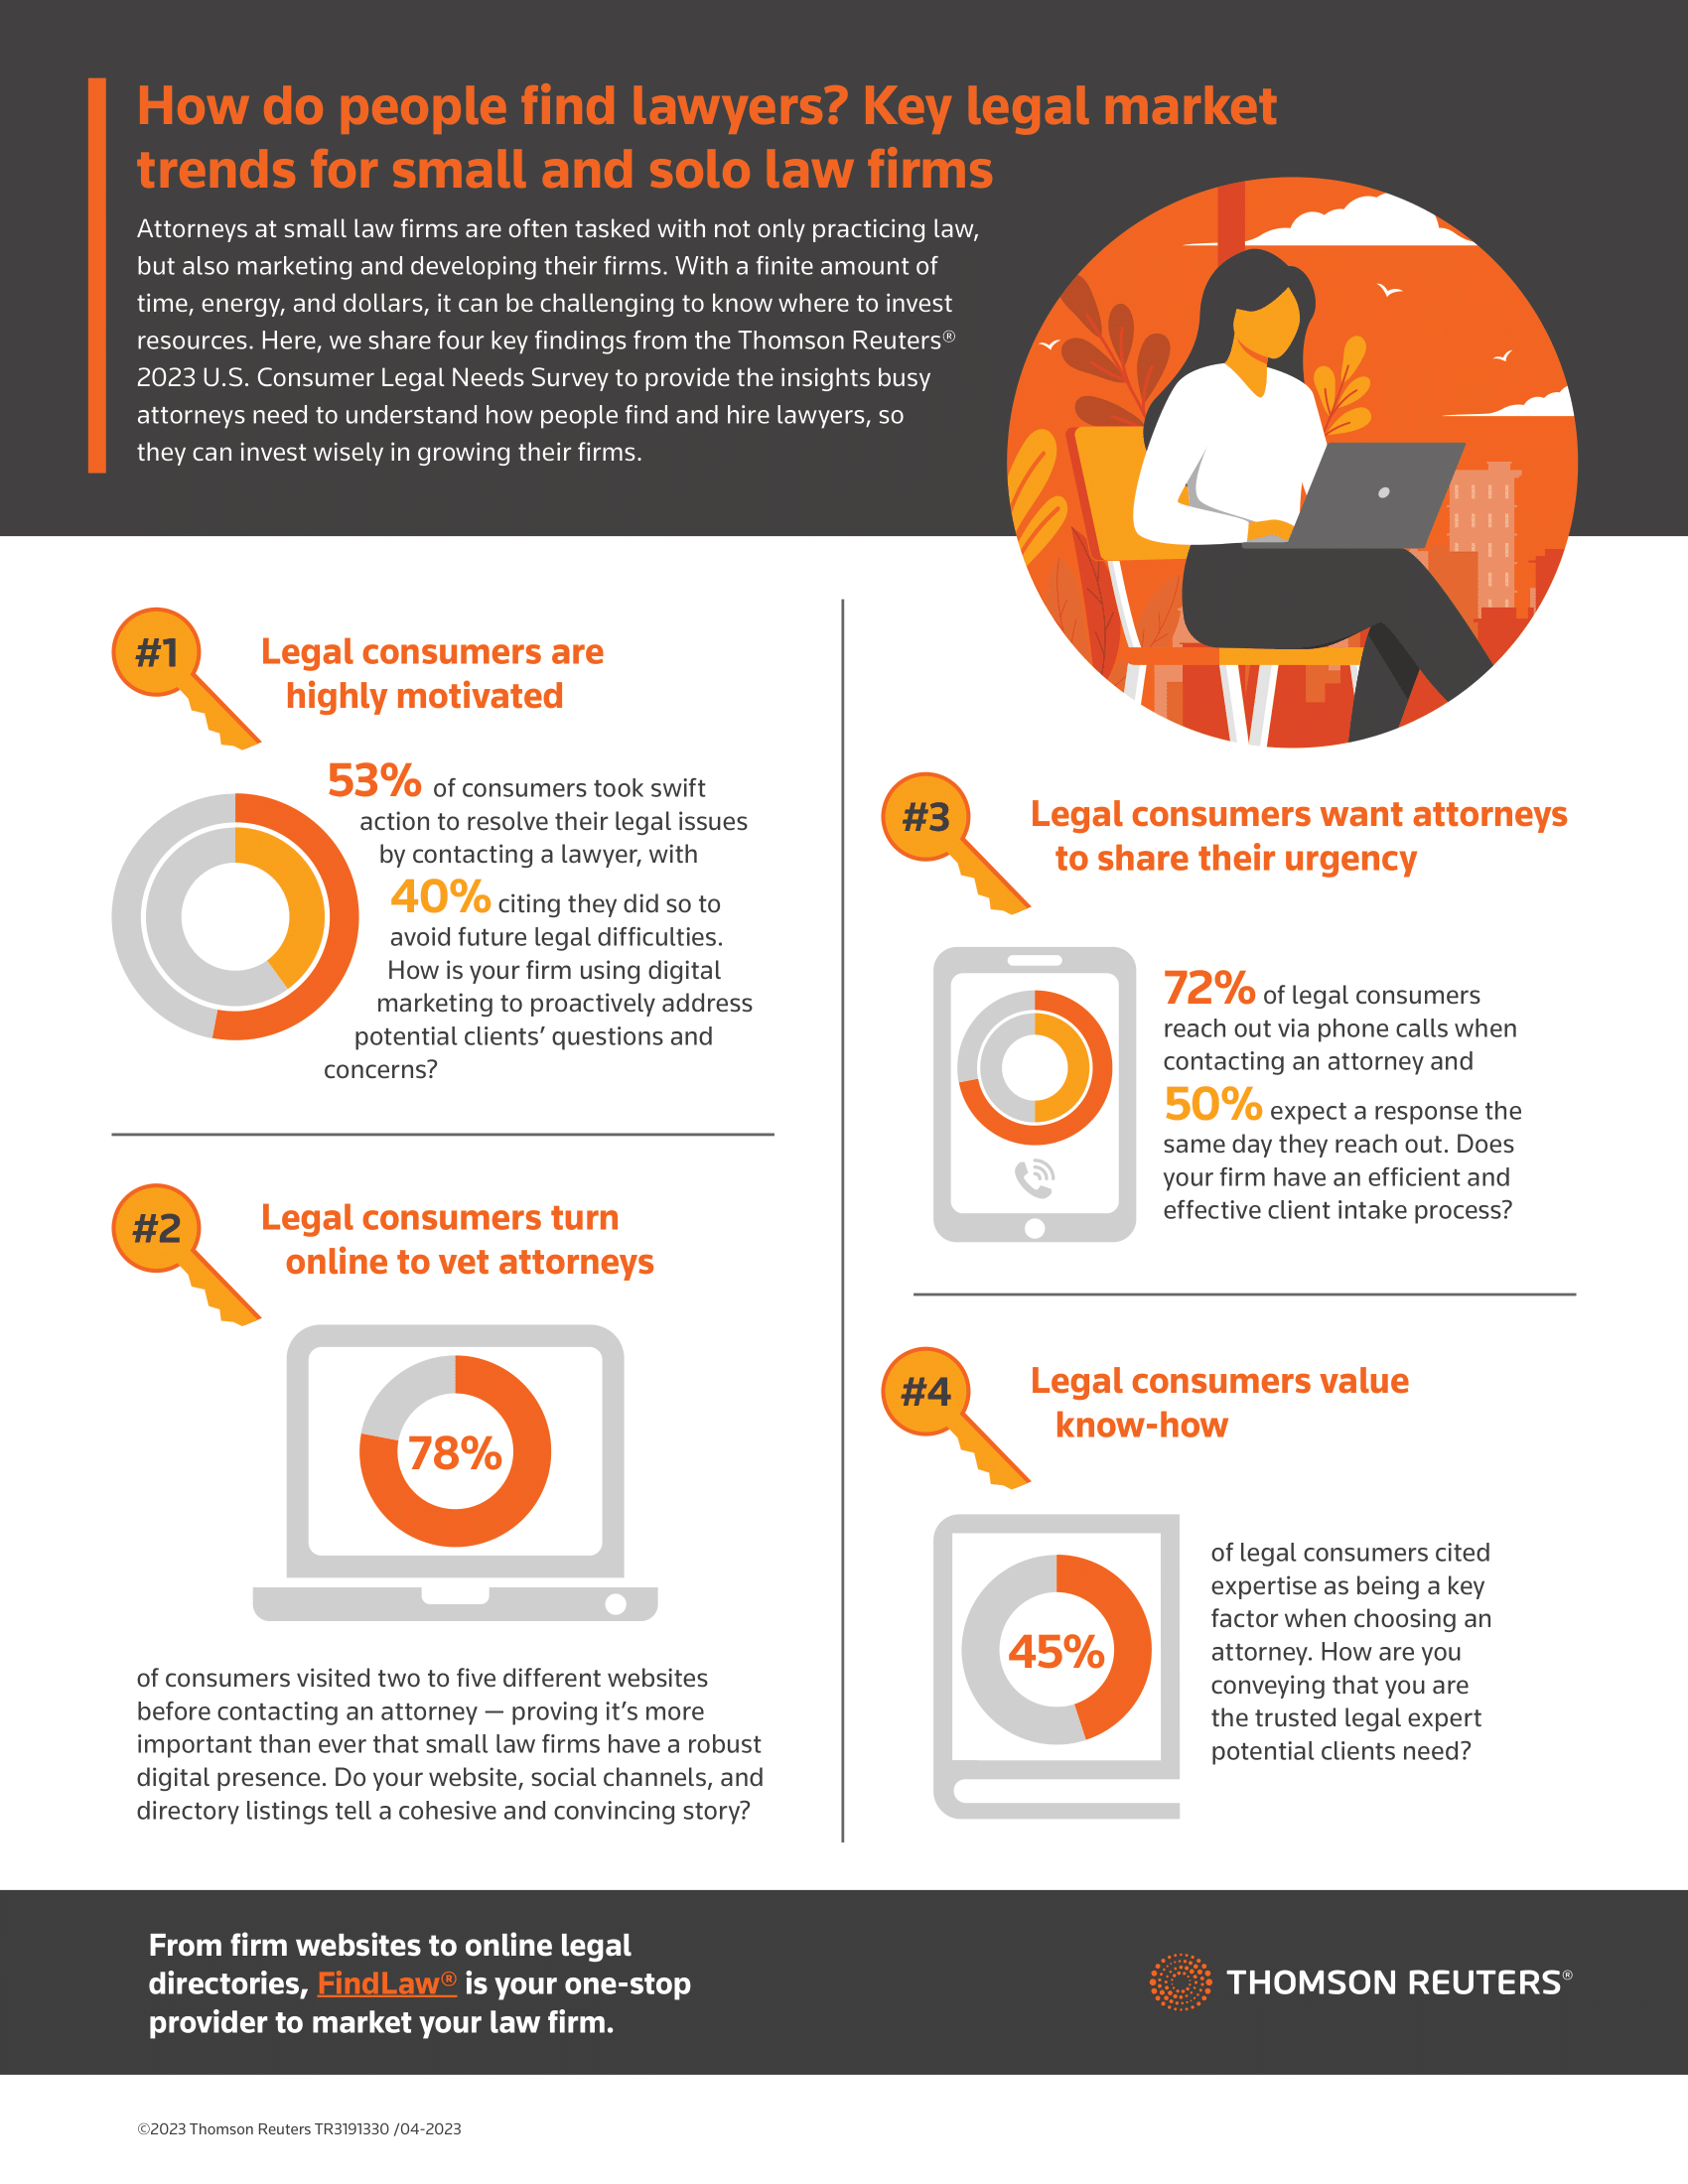 Infographic describing how people find lawyers and the key legal market trends for small and solo law firms.